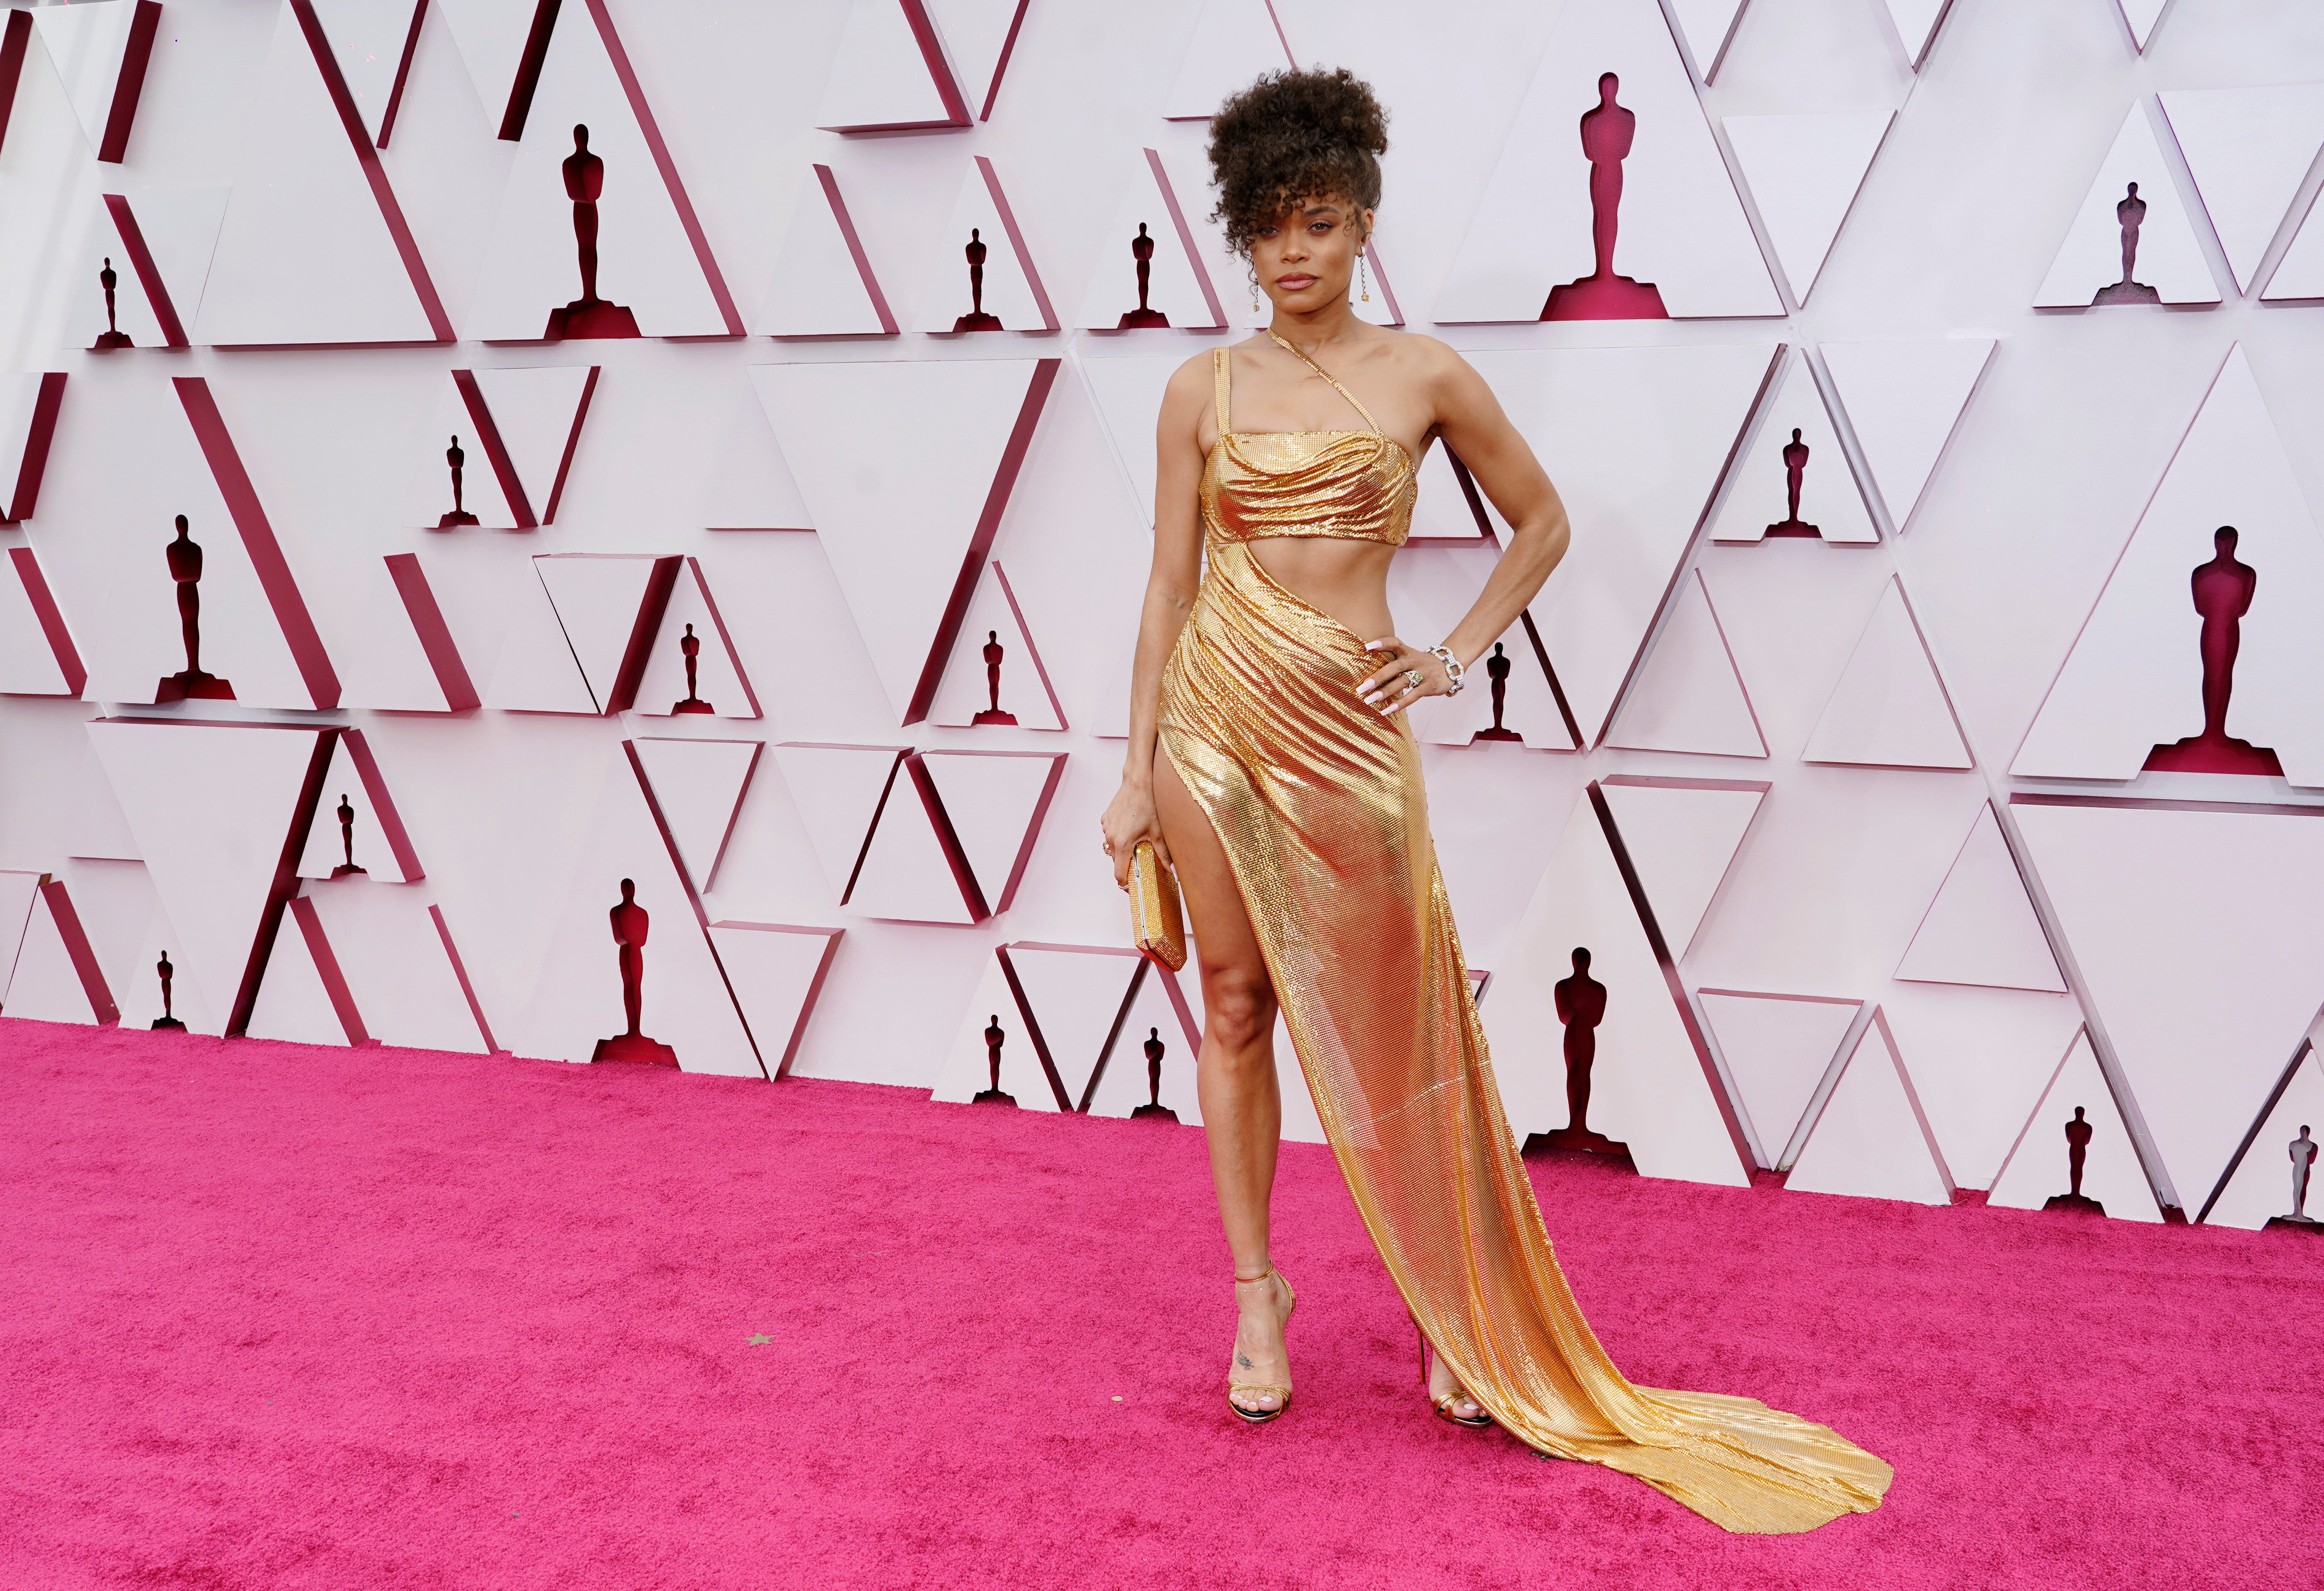 Andra Day on the red carpet wearing Vera Wang